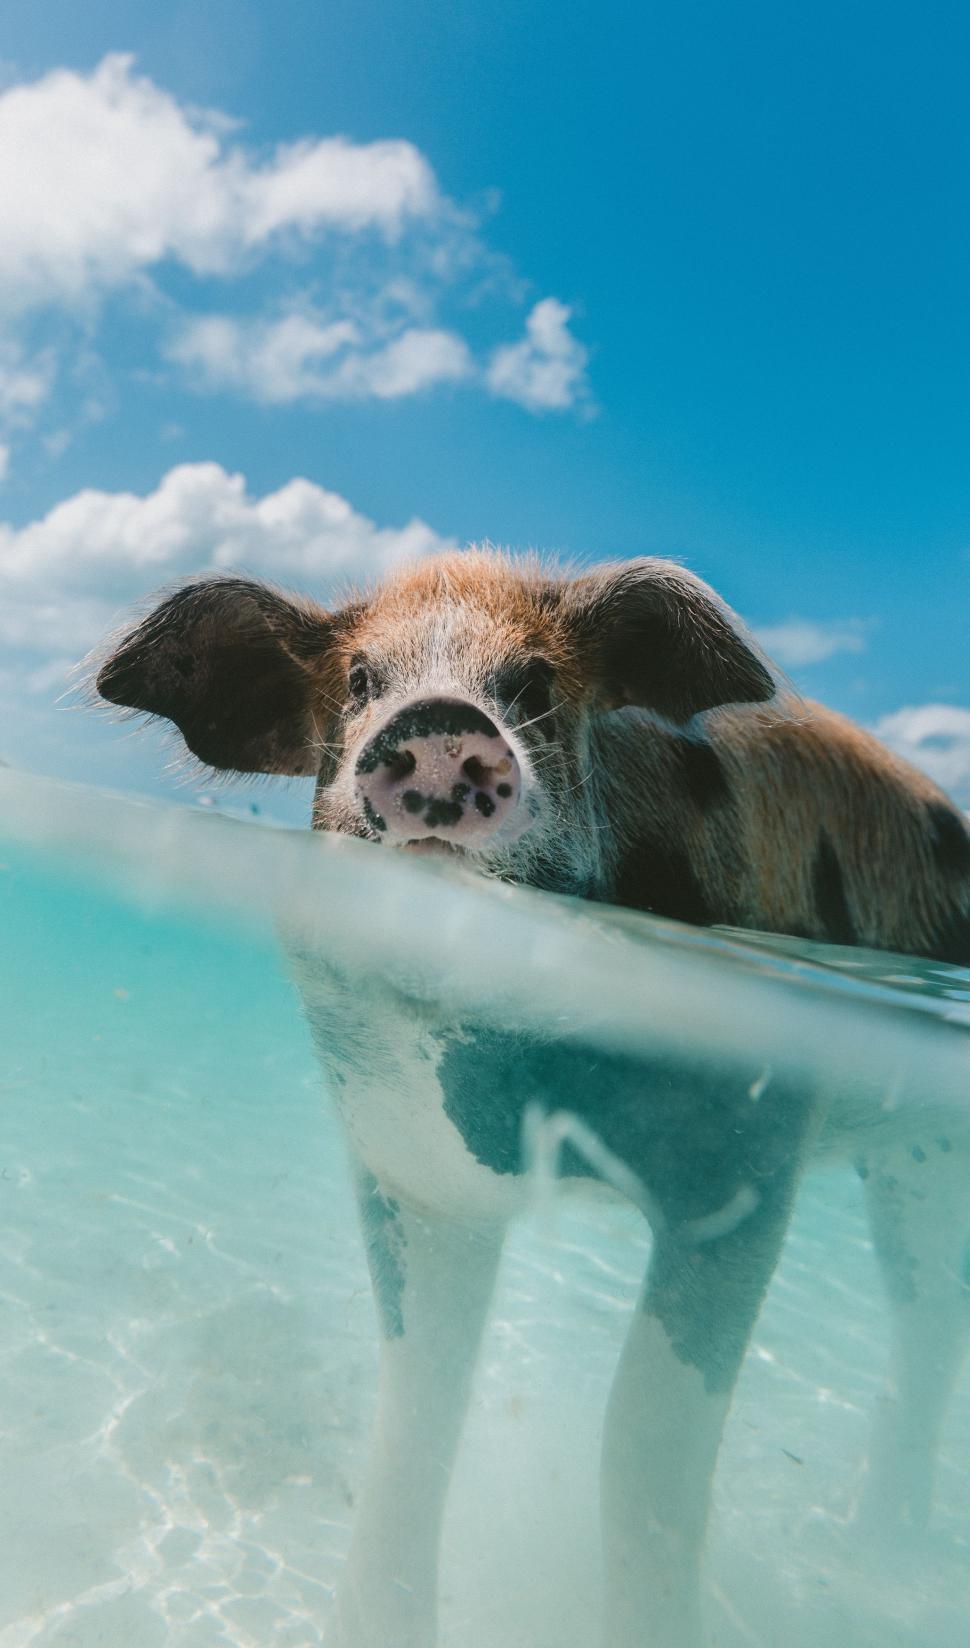 Free Image of Pig Swimming in Clear Blue Water 